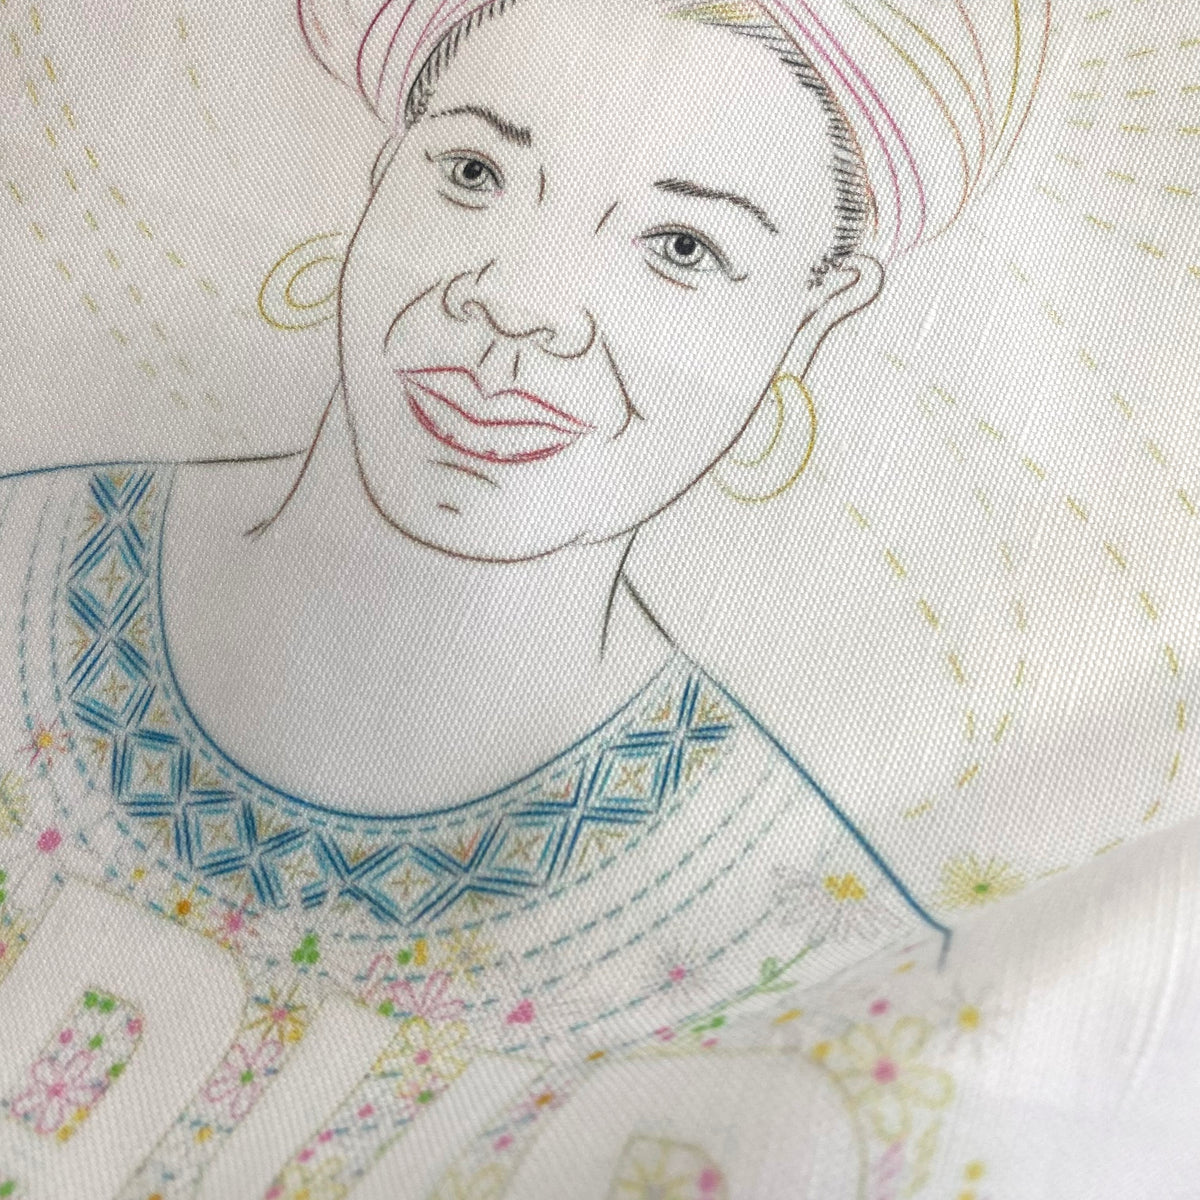 Maya Angelou Printed Fabric Pattern and PDF Embroidery Download